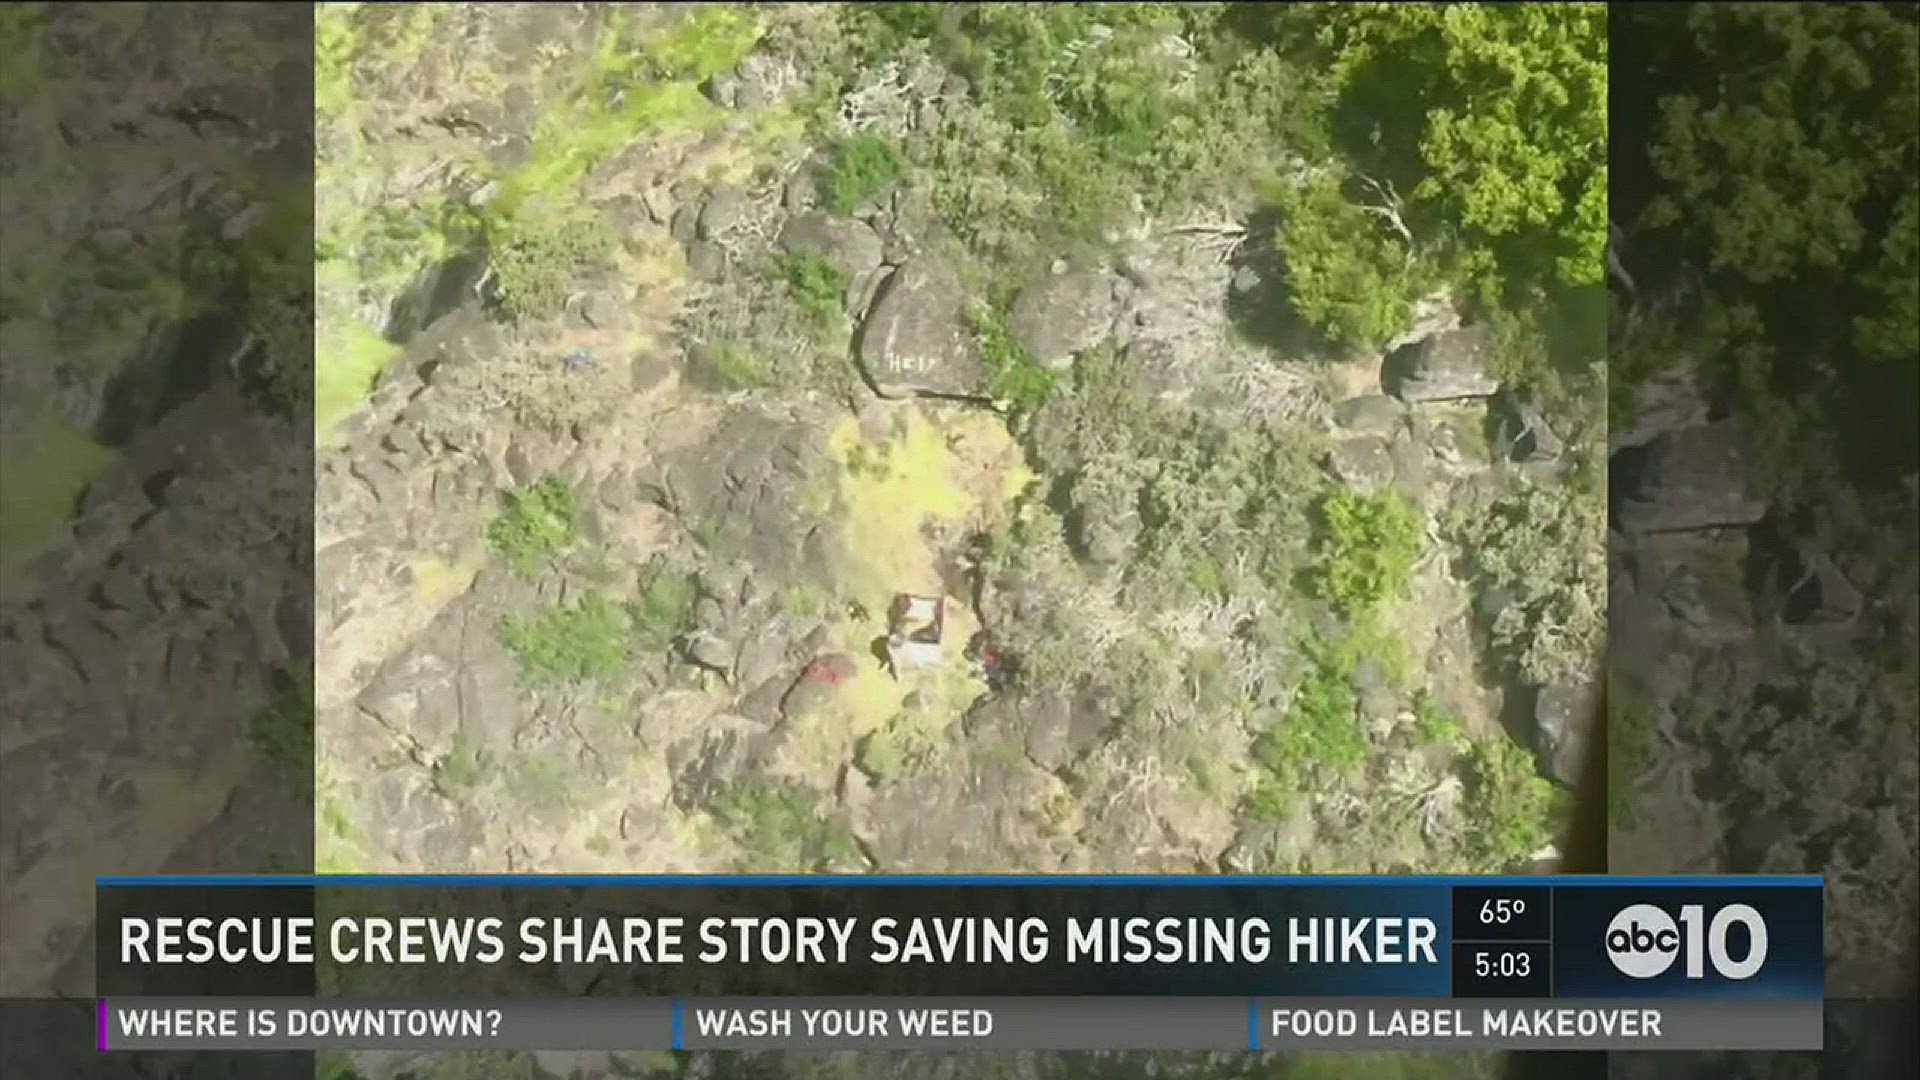 Rescue crews reflect back on saving missing hiker. (May 20, 2016)